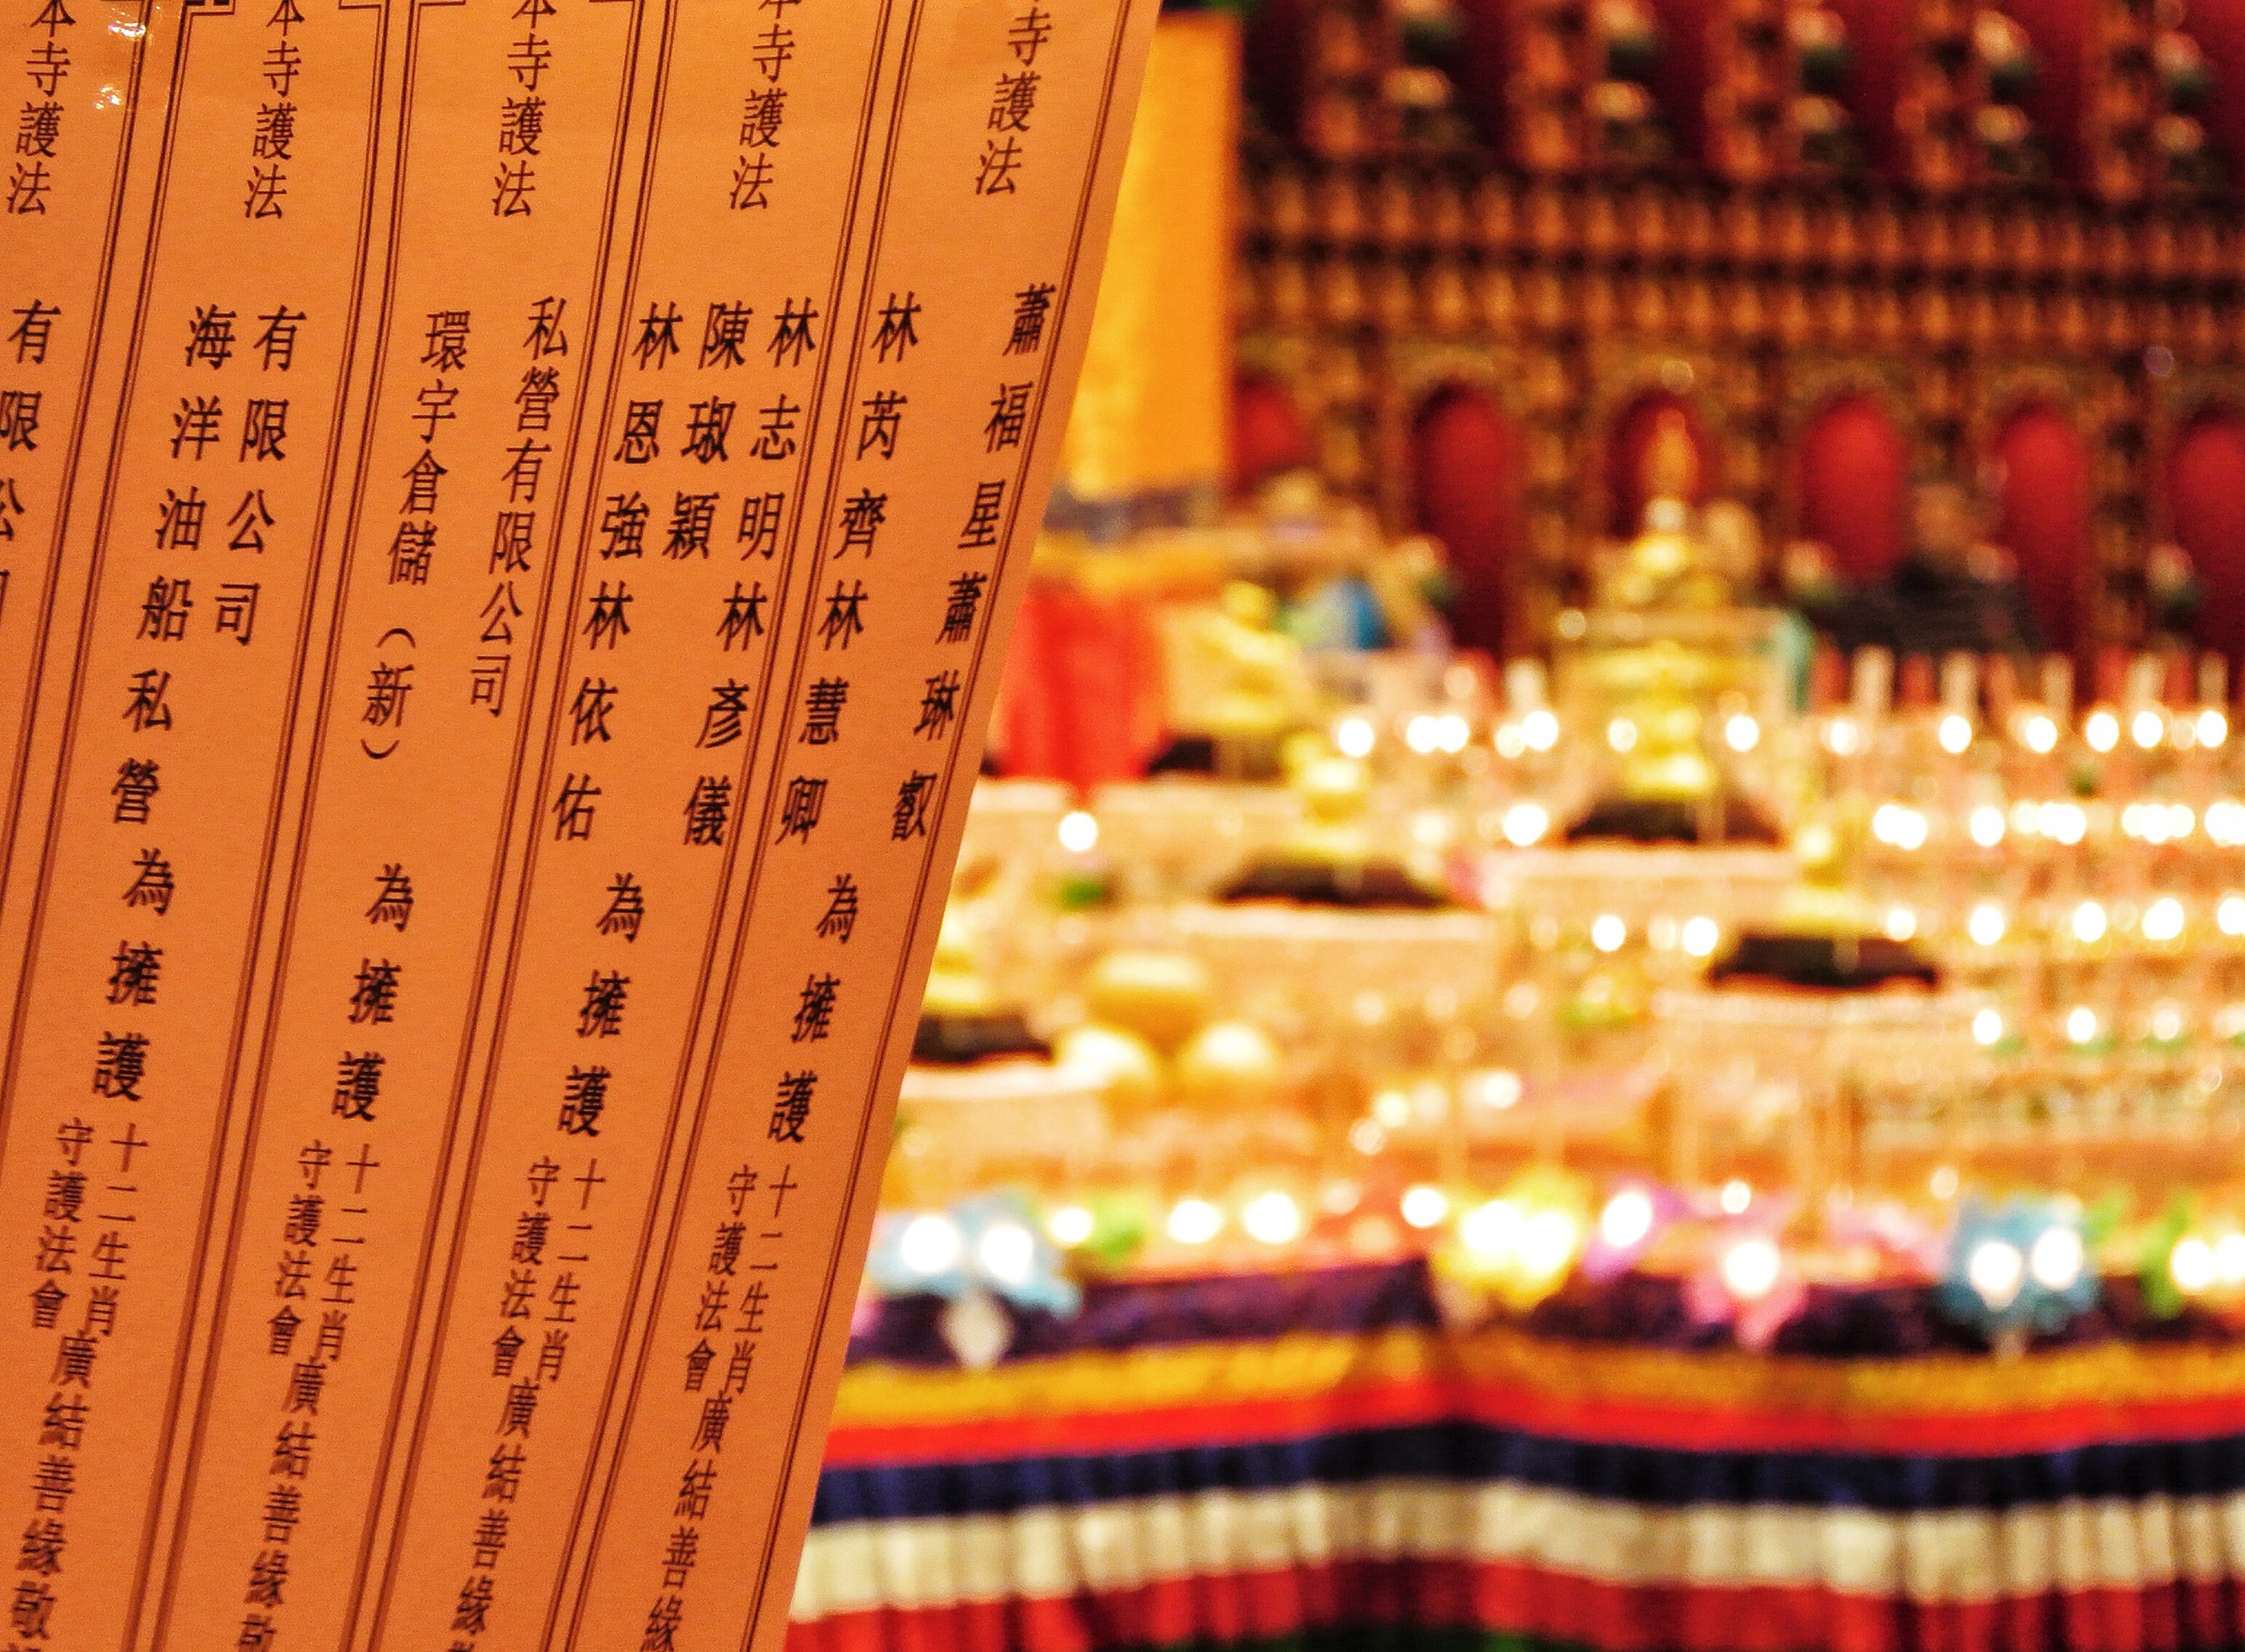    Buddha Tooth Relic Temple   